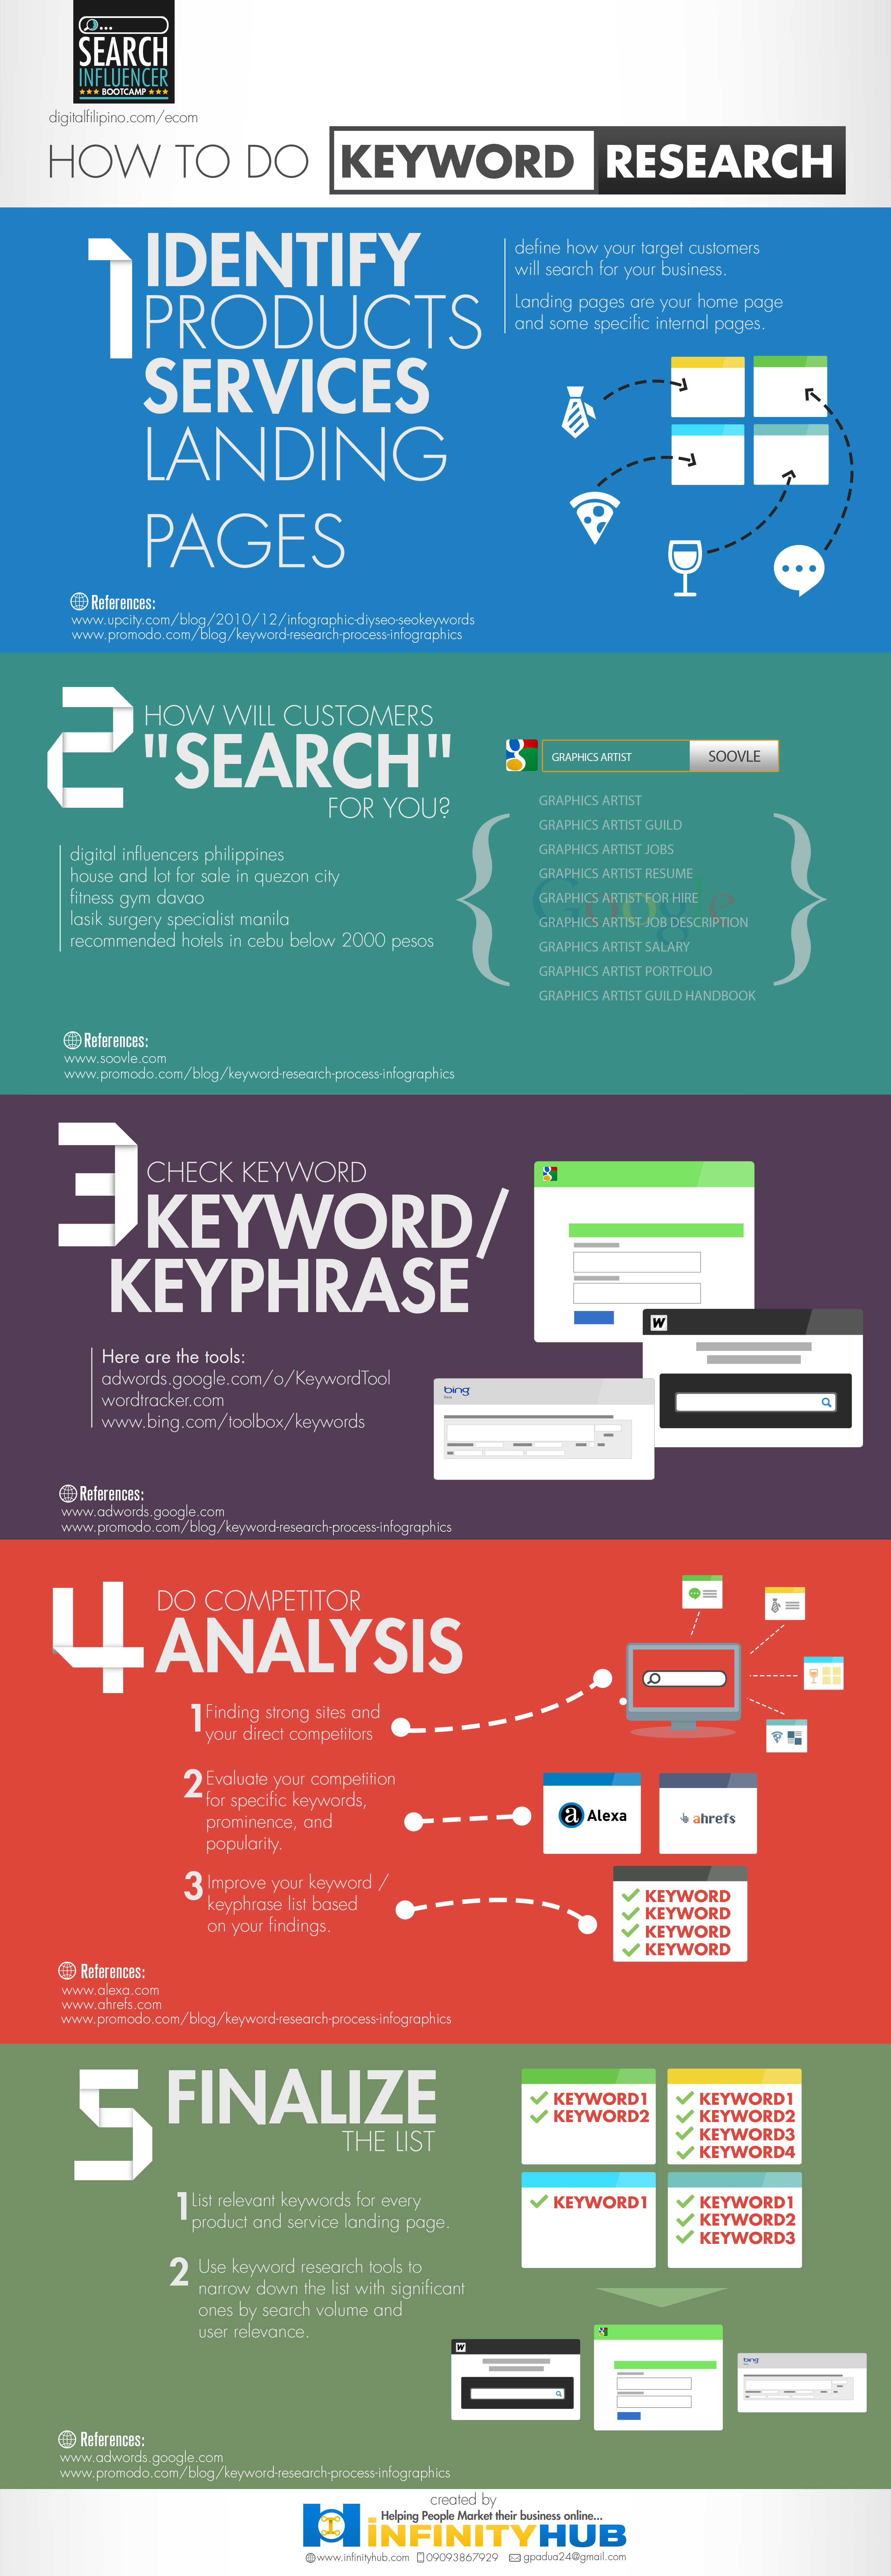 How to search for keywords